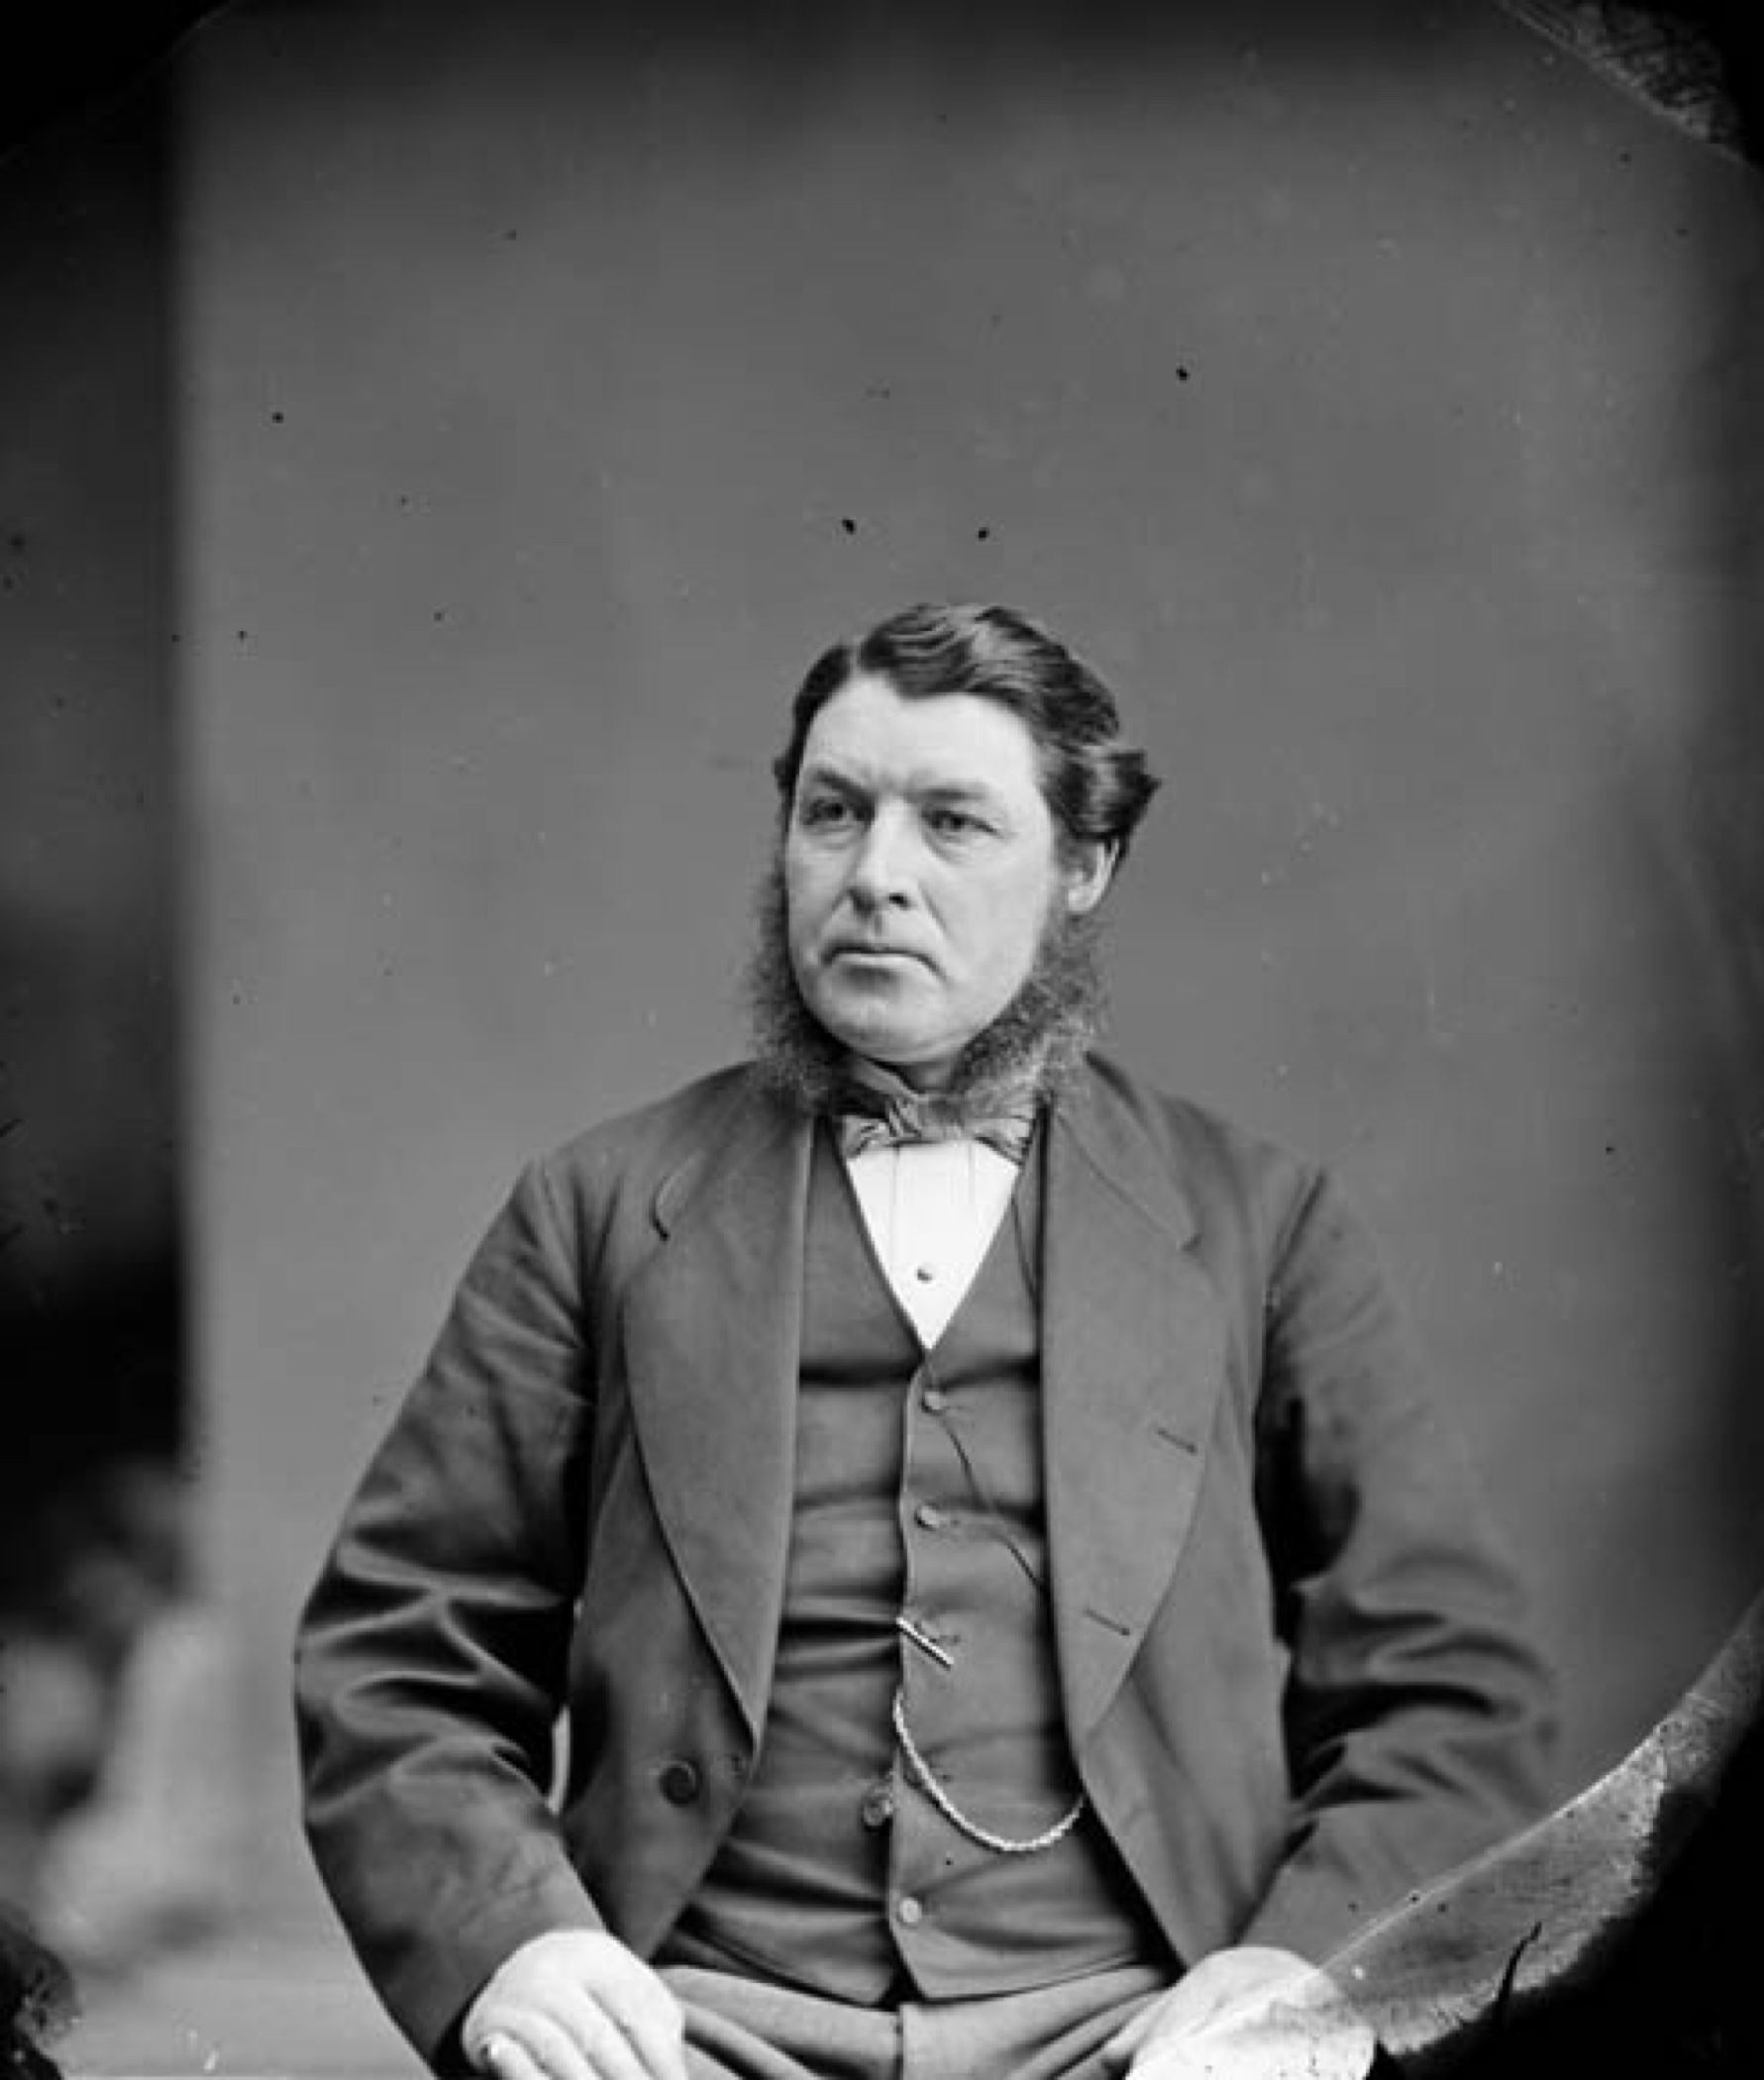 A formal black and white photograph of Sir Charles Tupper, seated, with dark hair and sideburns, in a suite and vest, his hands resting on his thighs and a watch-chain visible across his front. His expression is frowning and the edges of his mouth are turned down.